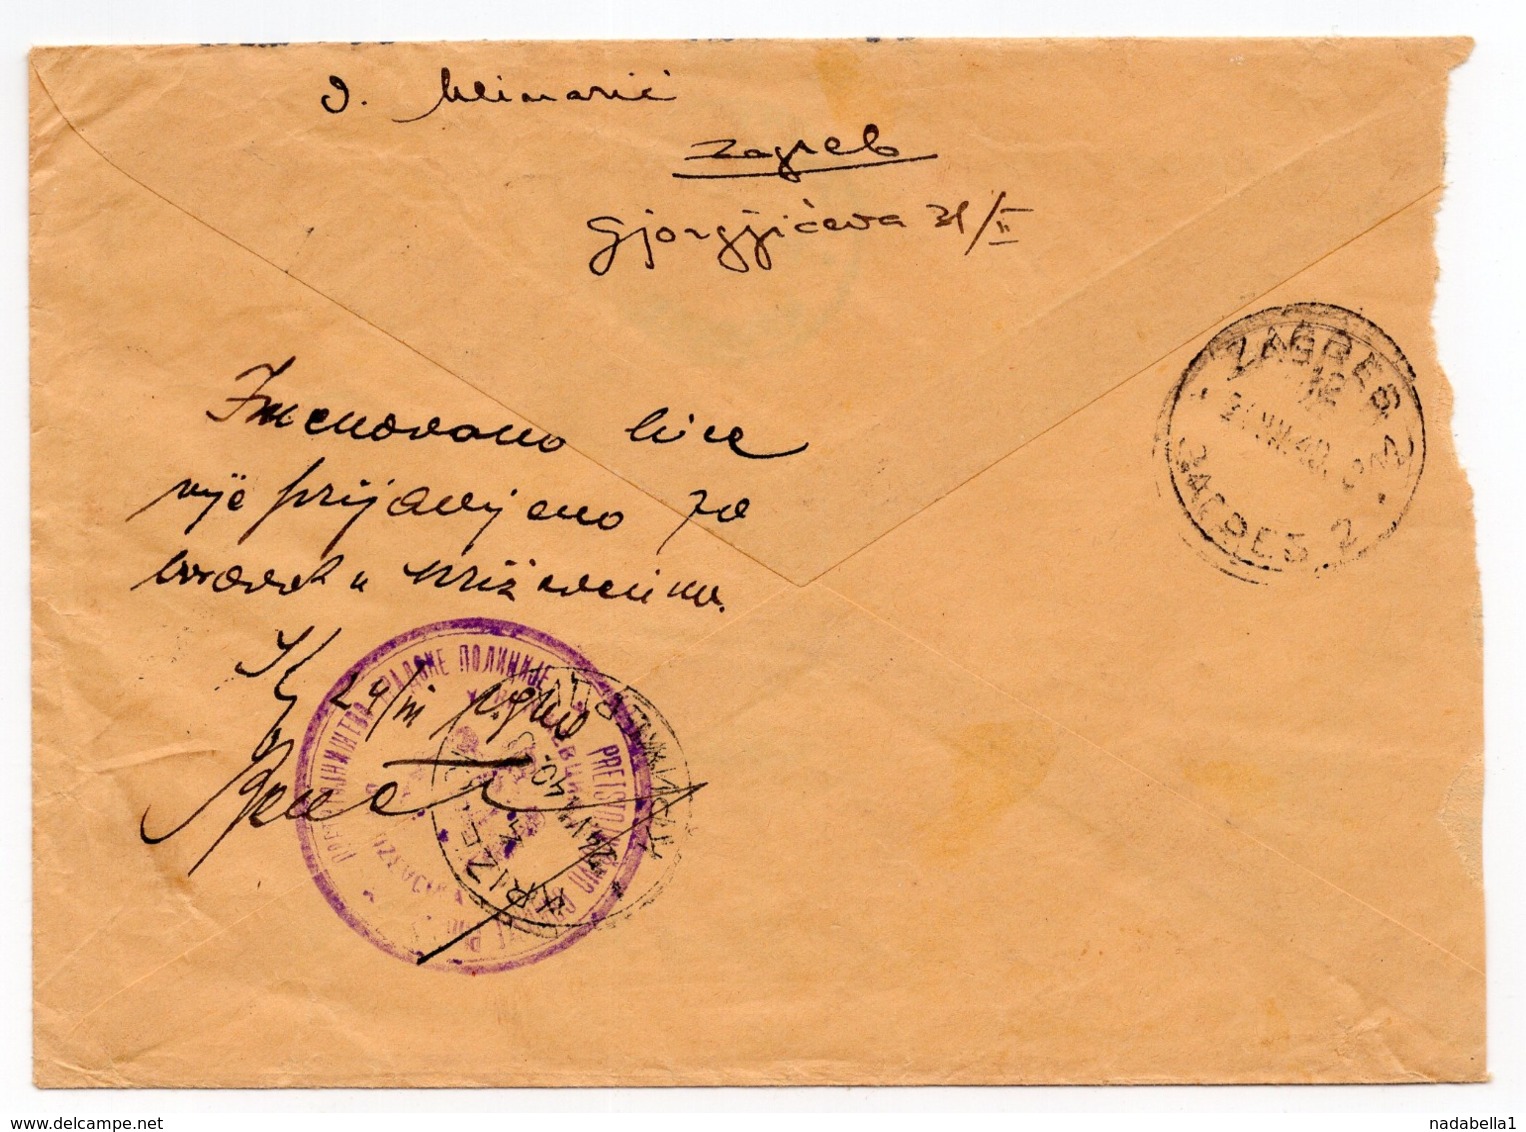 1940 YUGOSLAVIA, CROATIA, ZAGREB TO KRIŽEVCI, REGISTERED MAIL, RETOUR, OFFICIALS STAMP AT THE BACK - Lettres & Documents